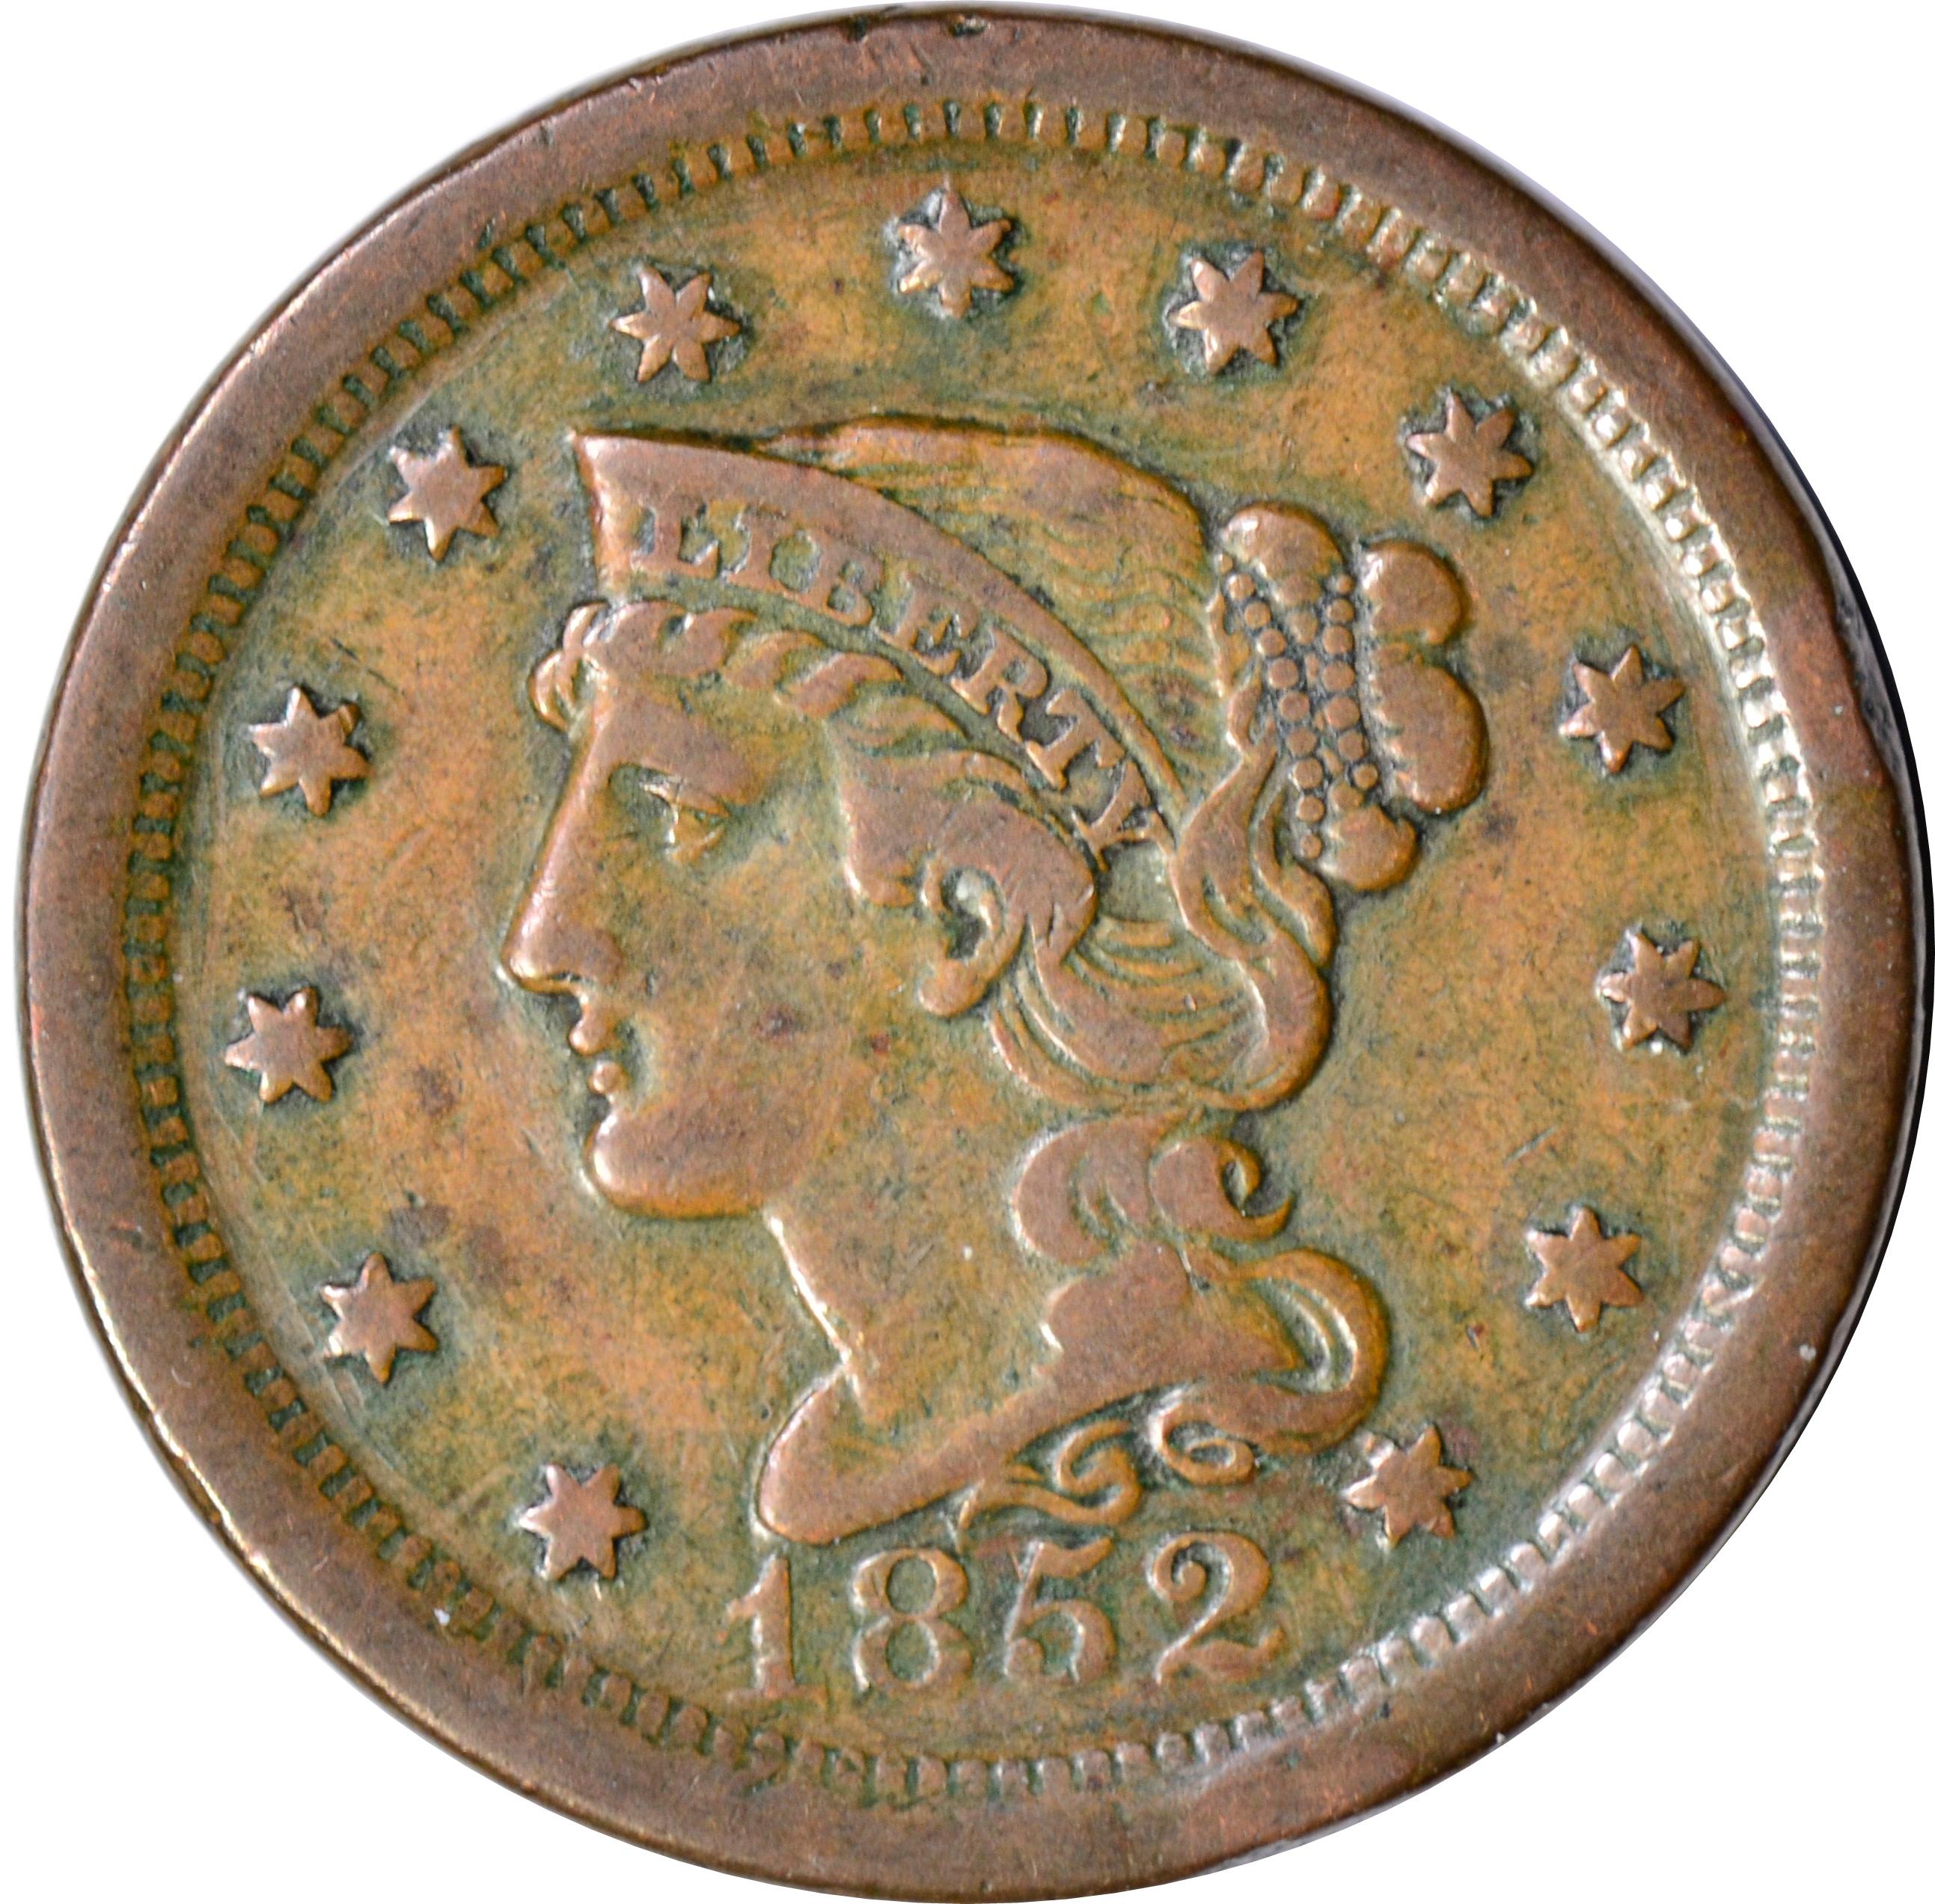 1852 LARGE CENT - ALTERED REVERSE